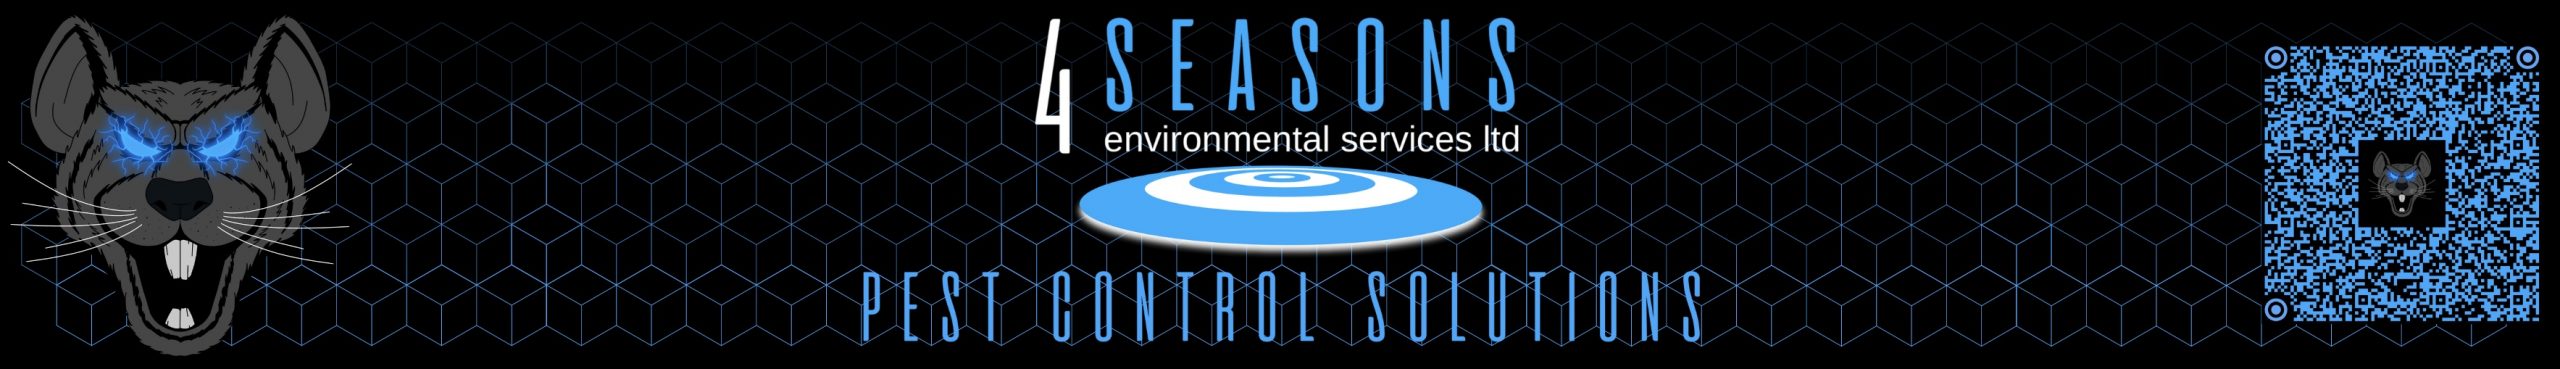 Website banner for 4 seasons pest control solutions